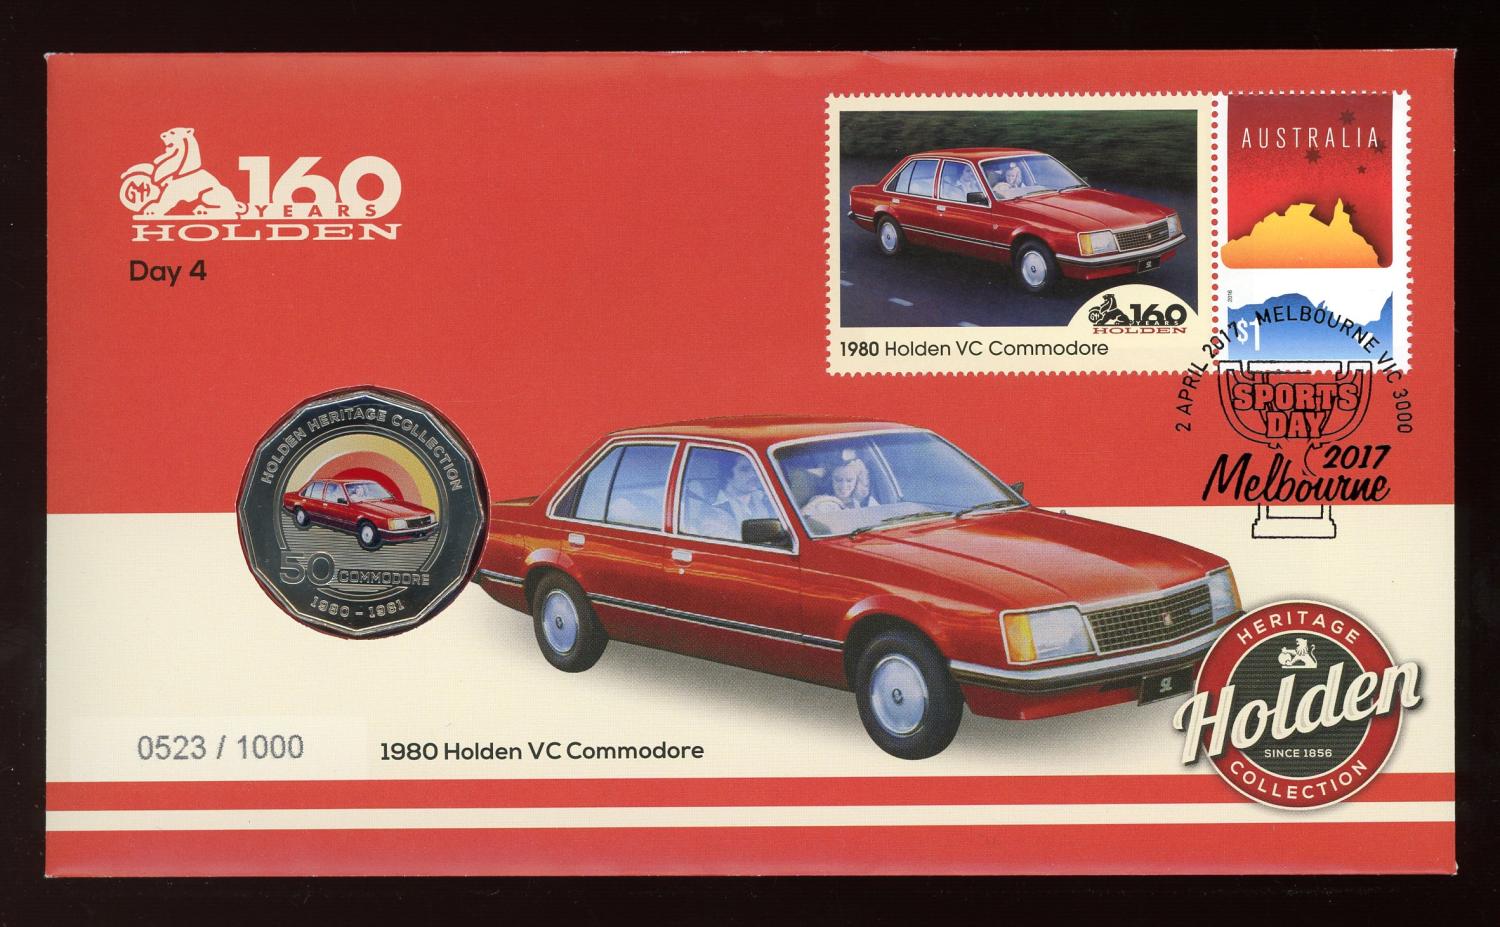 Thumbnail for 2017 Issue 9 1980 Holden VC Commodore Day 4 Melbourne Stamp Show Number 523